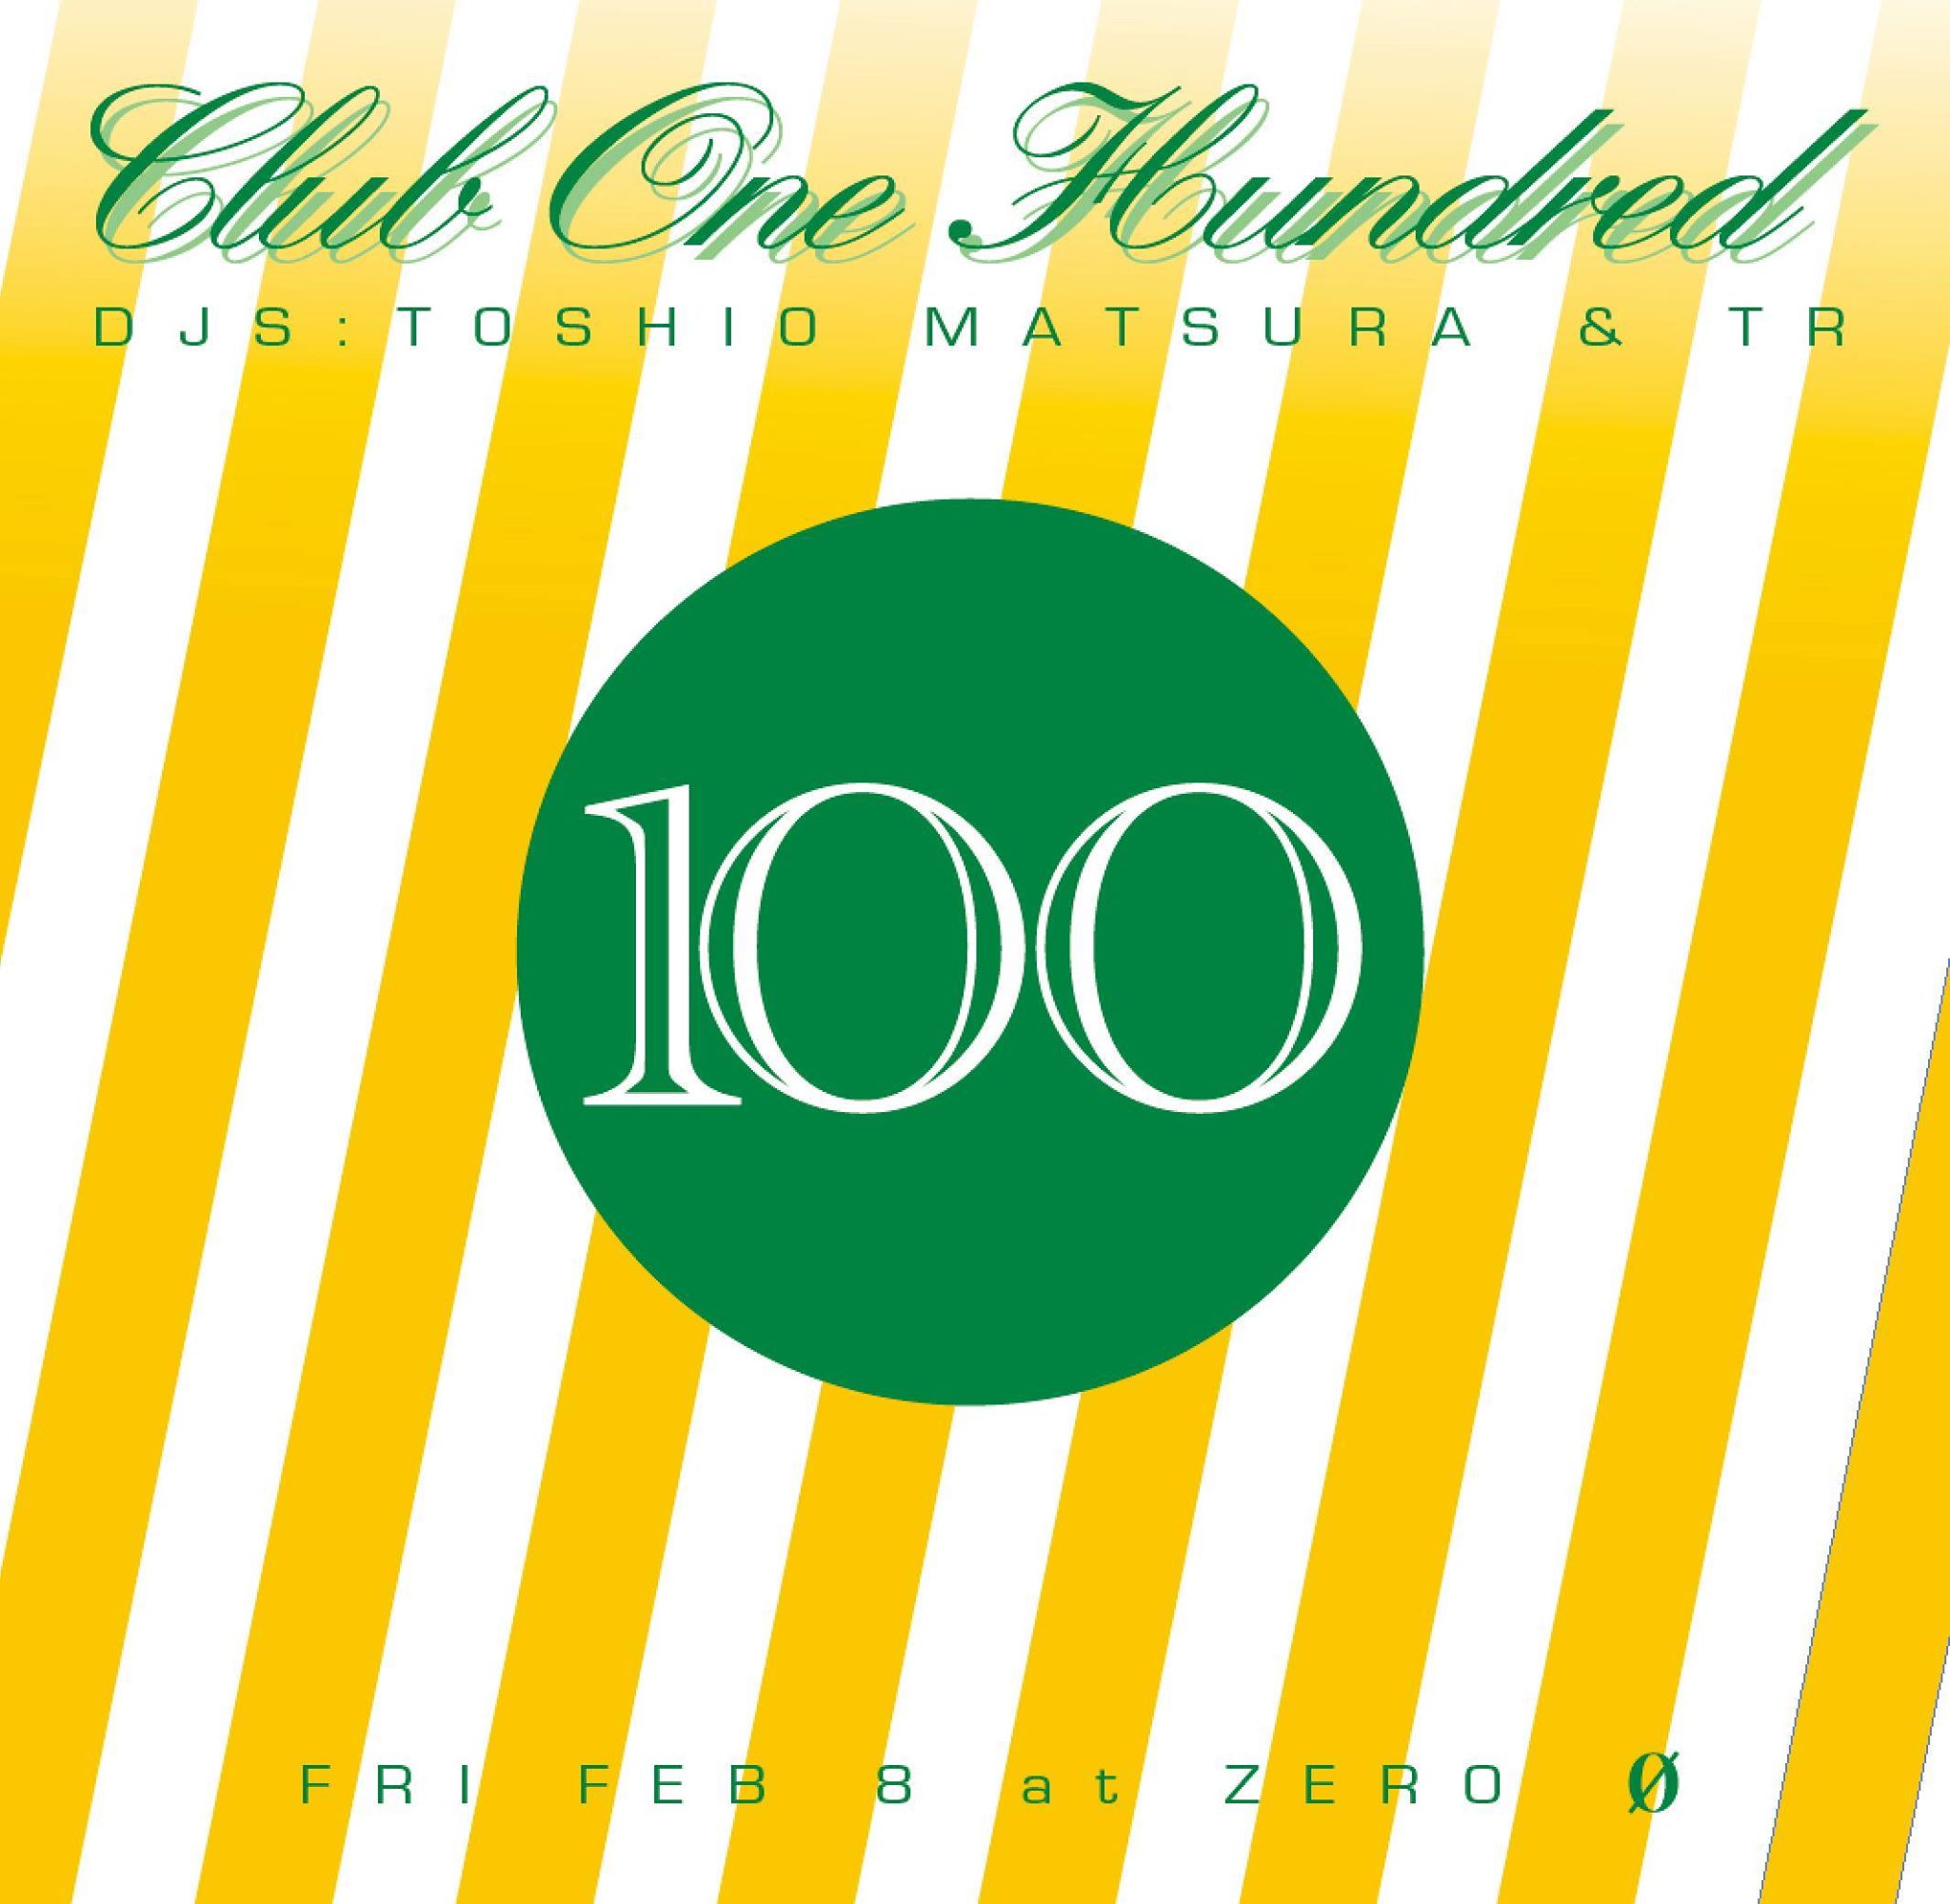 CLUB 100 (One Hundred)